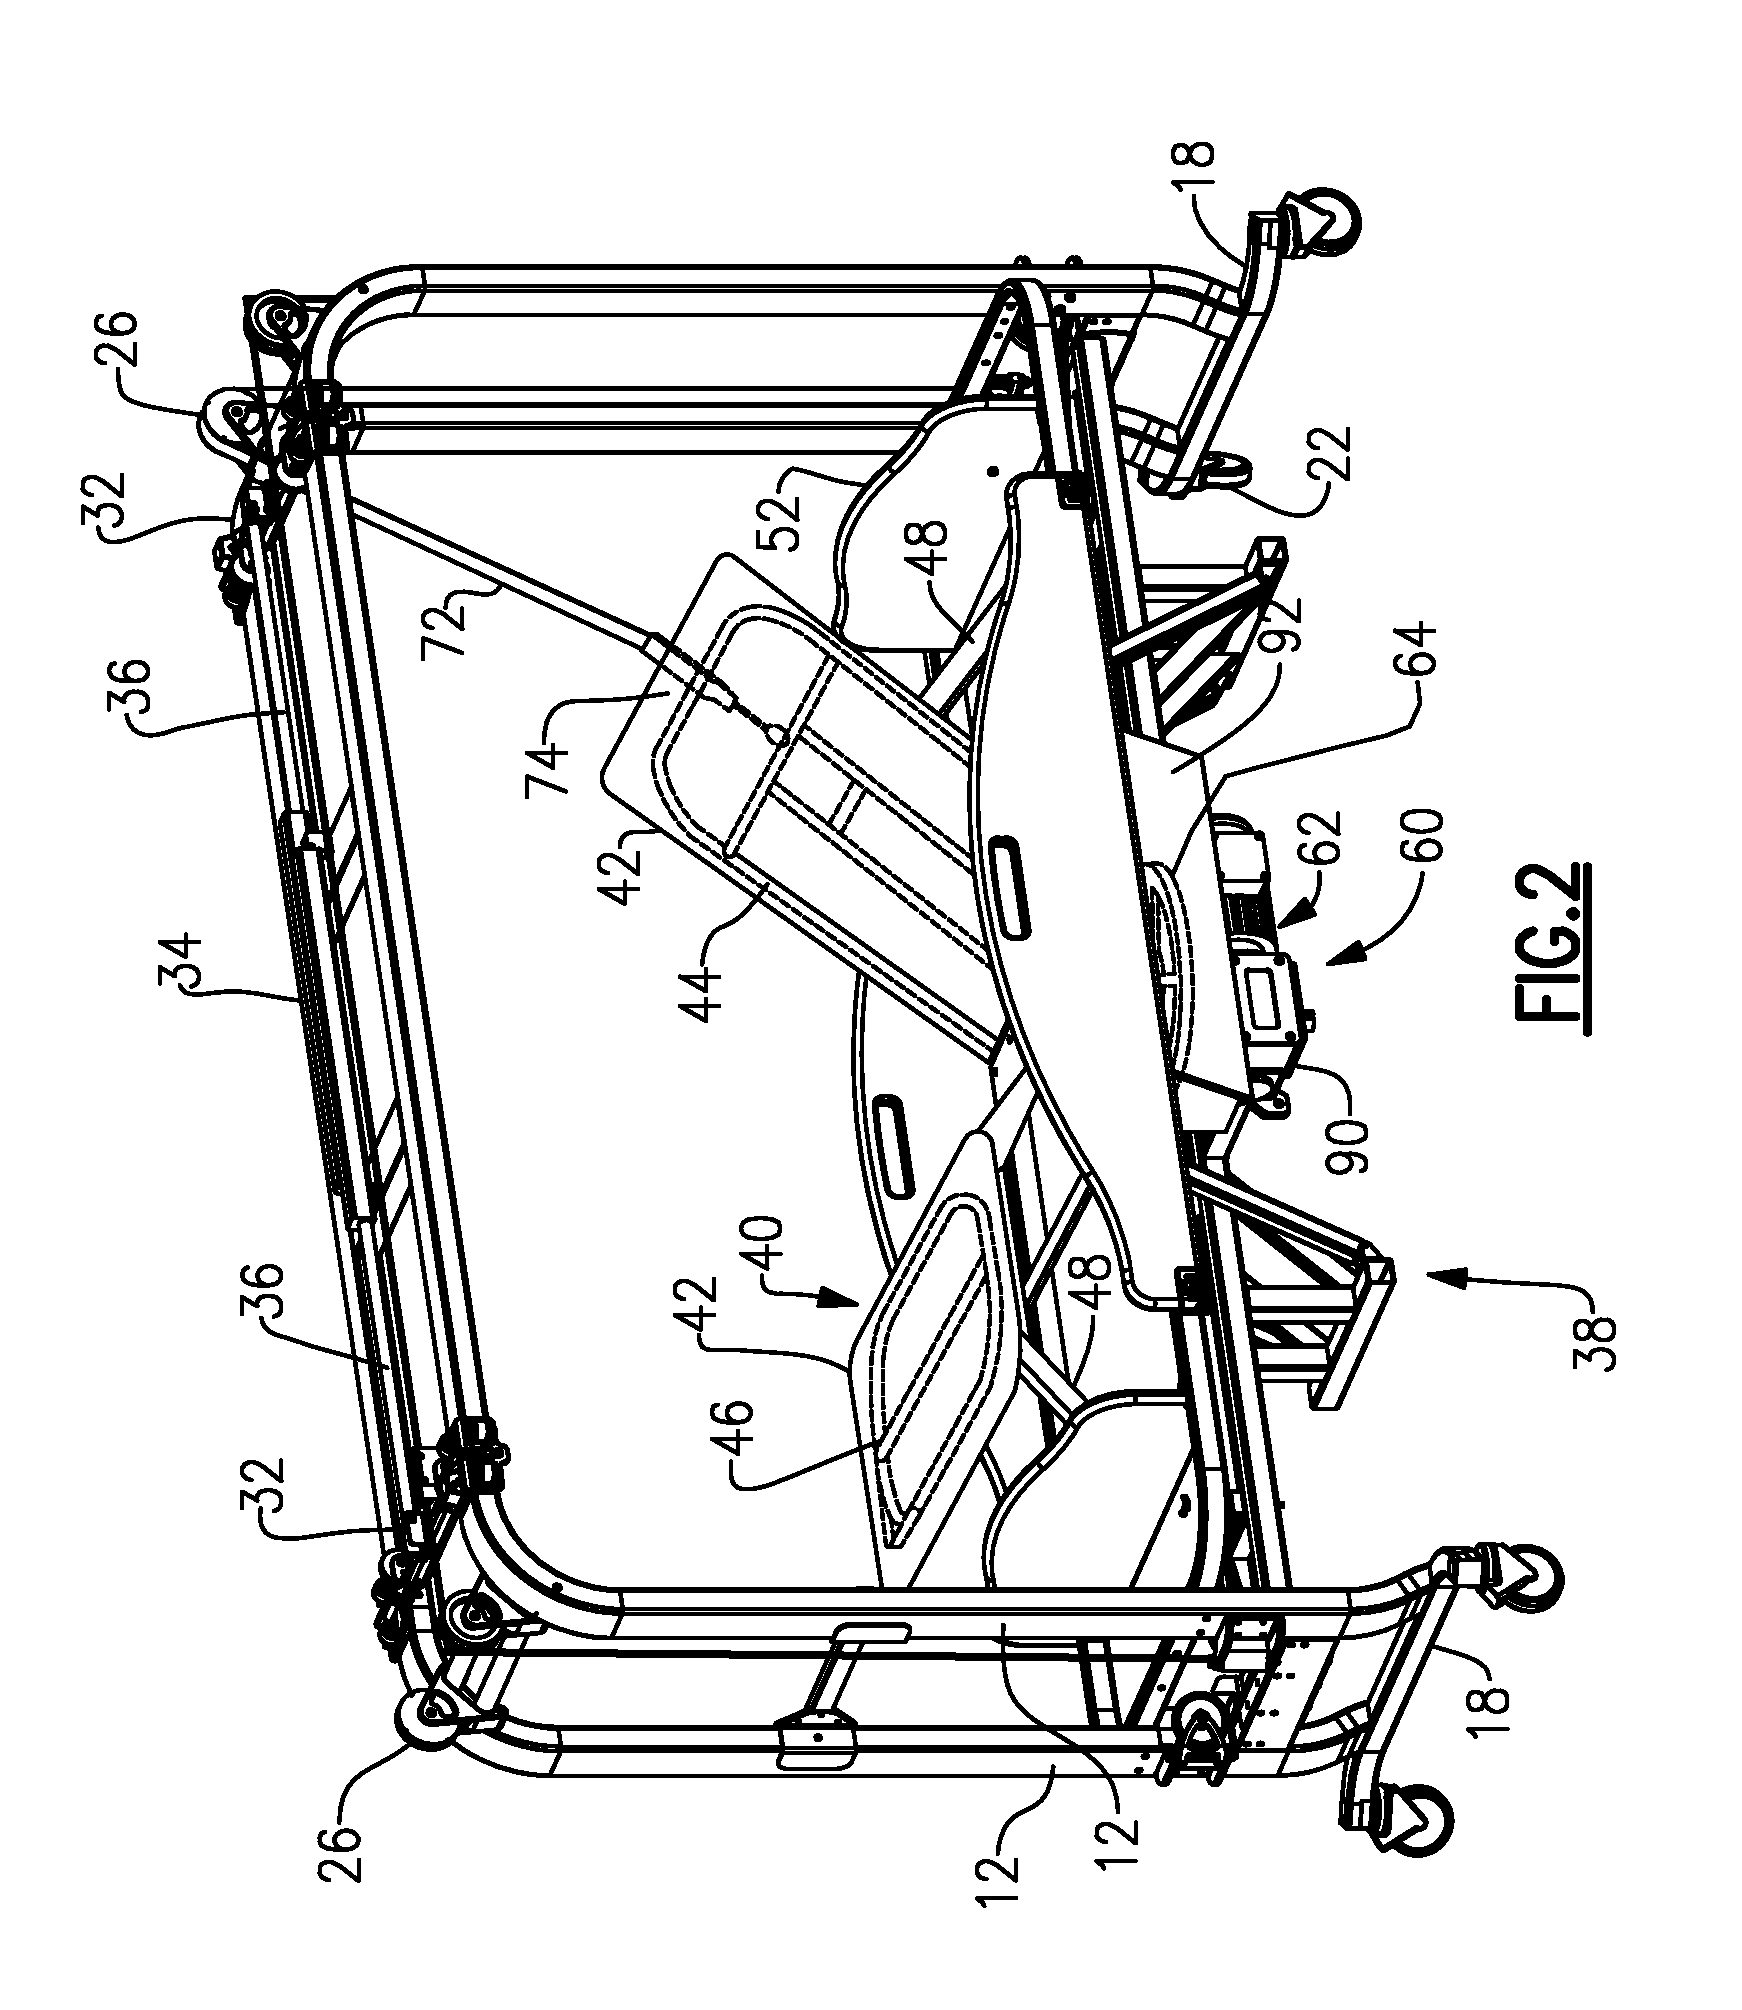 Passive Mobility Exercise and Range-of-Motion Bed Apparatus